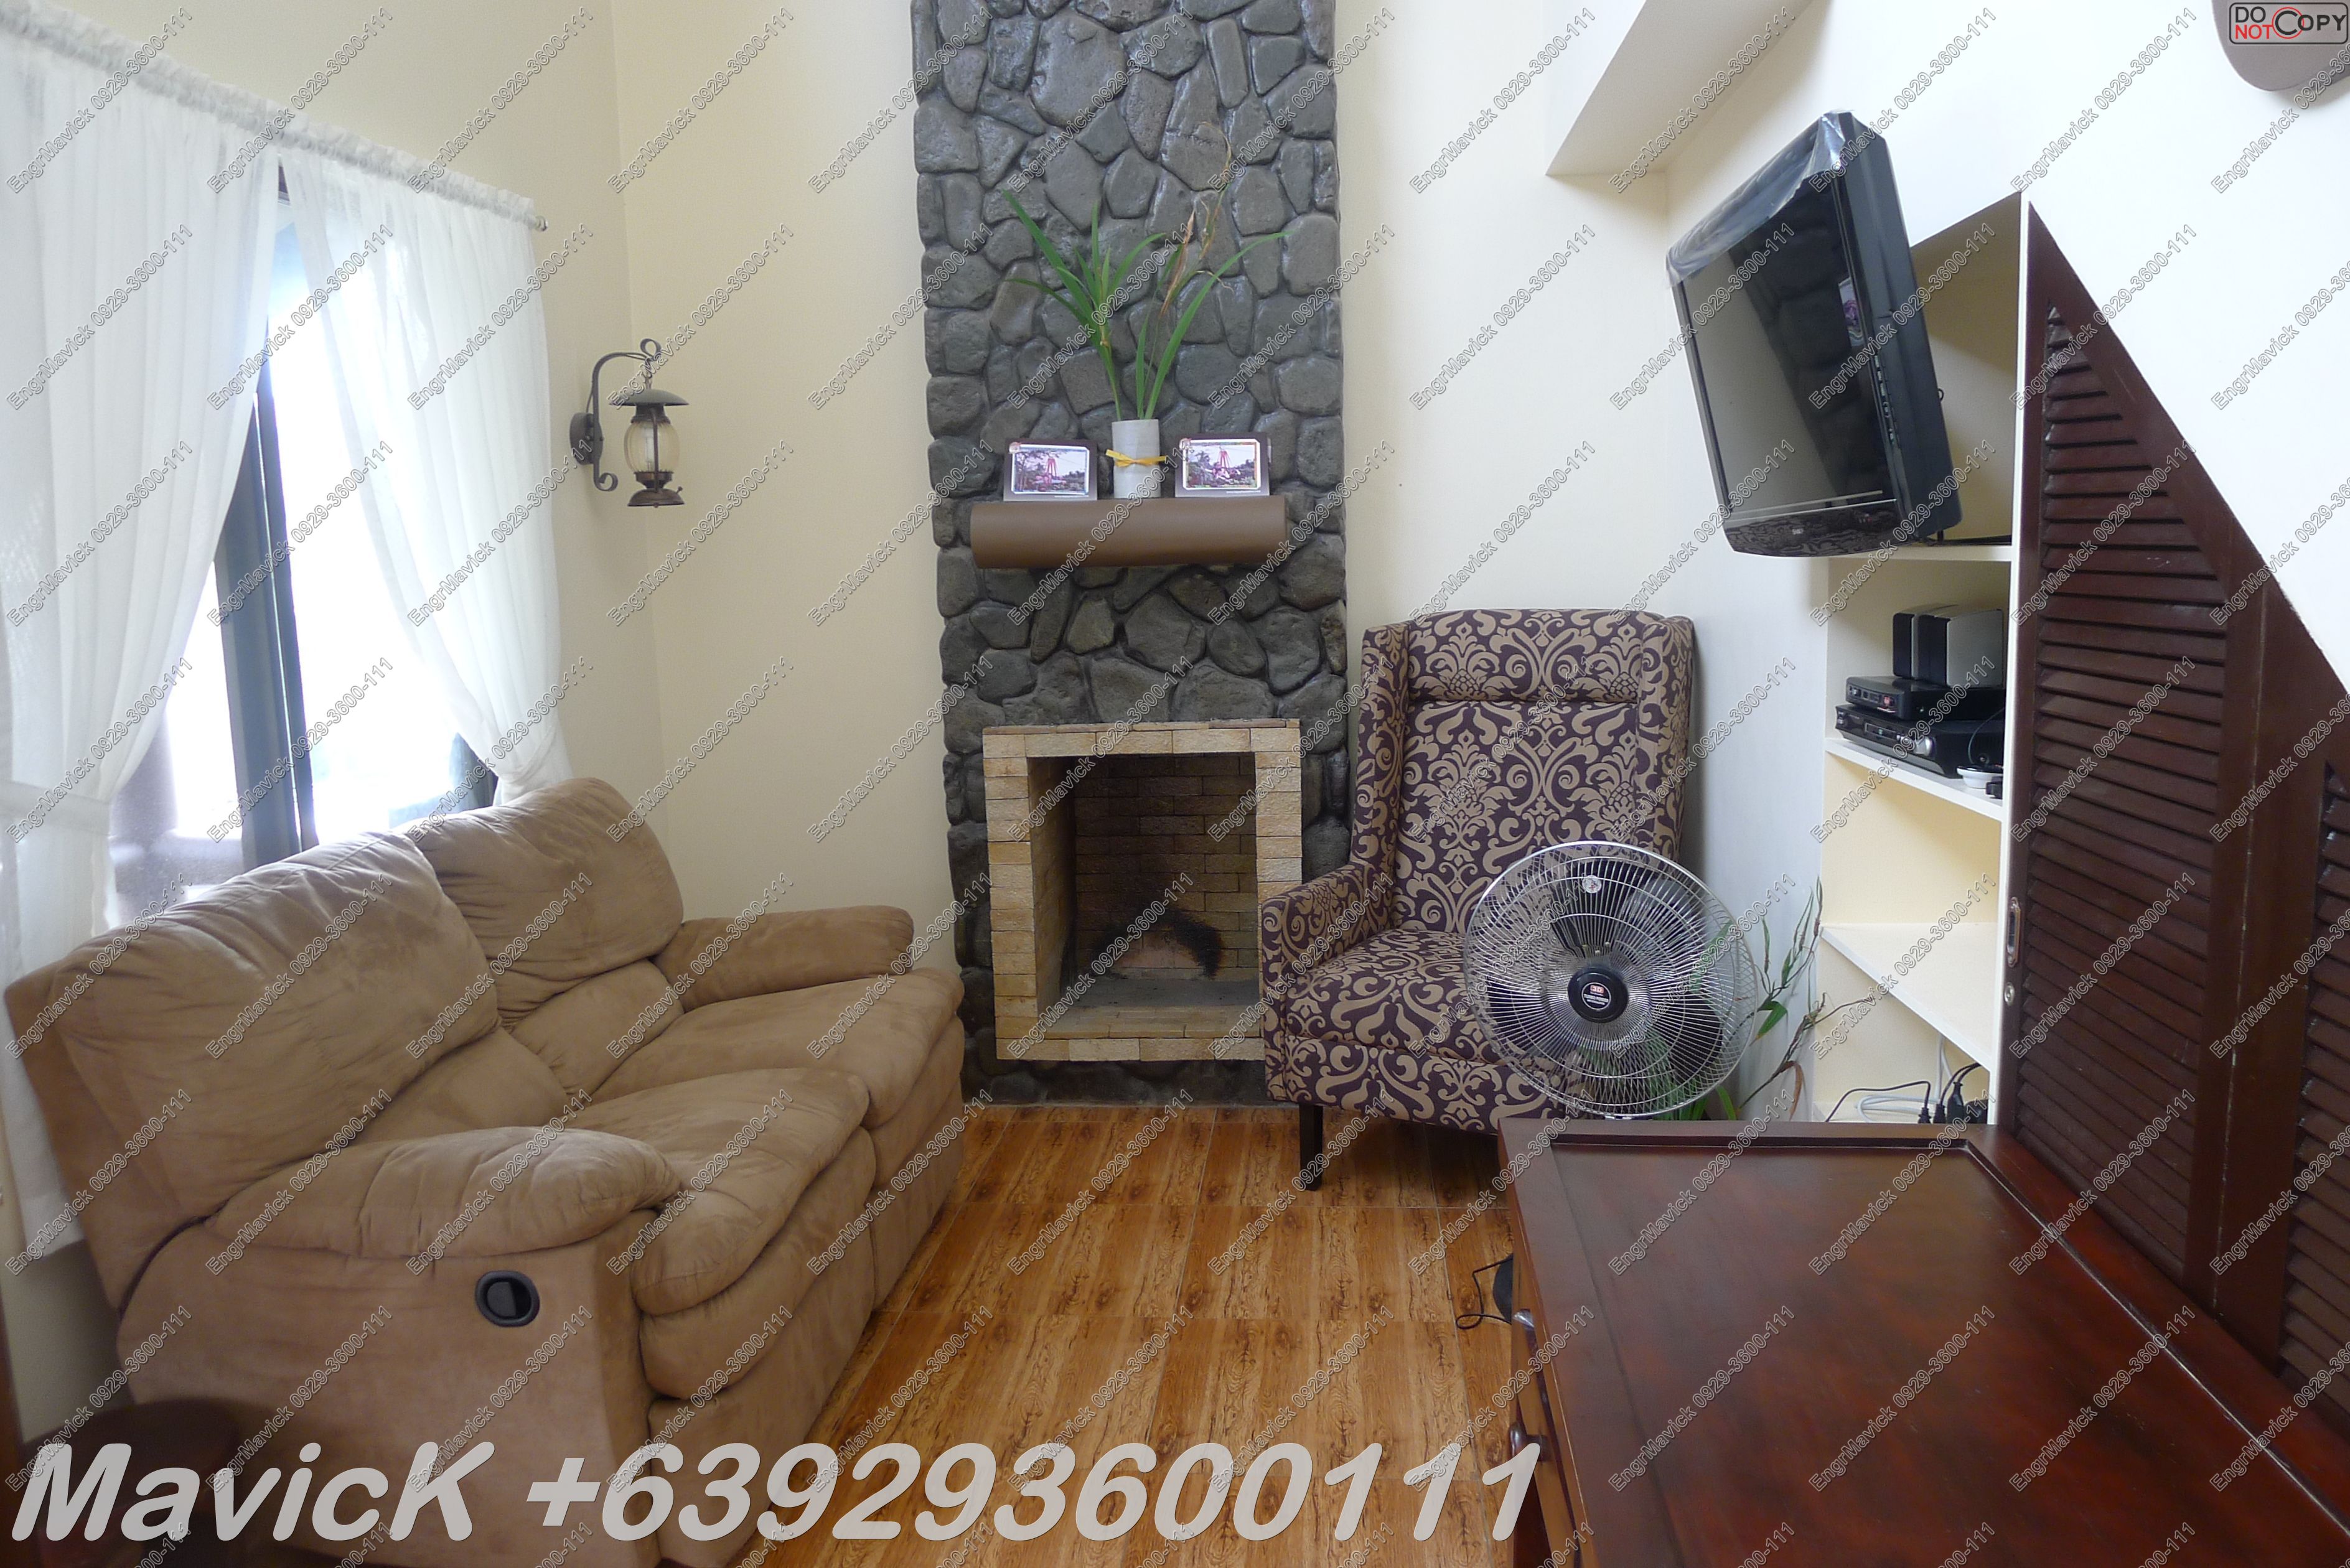 FOR RENT / LEASE: House Cavite 1